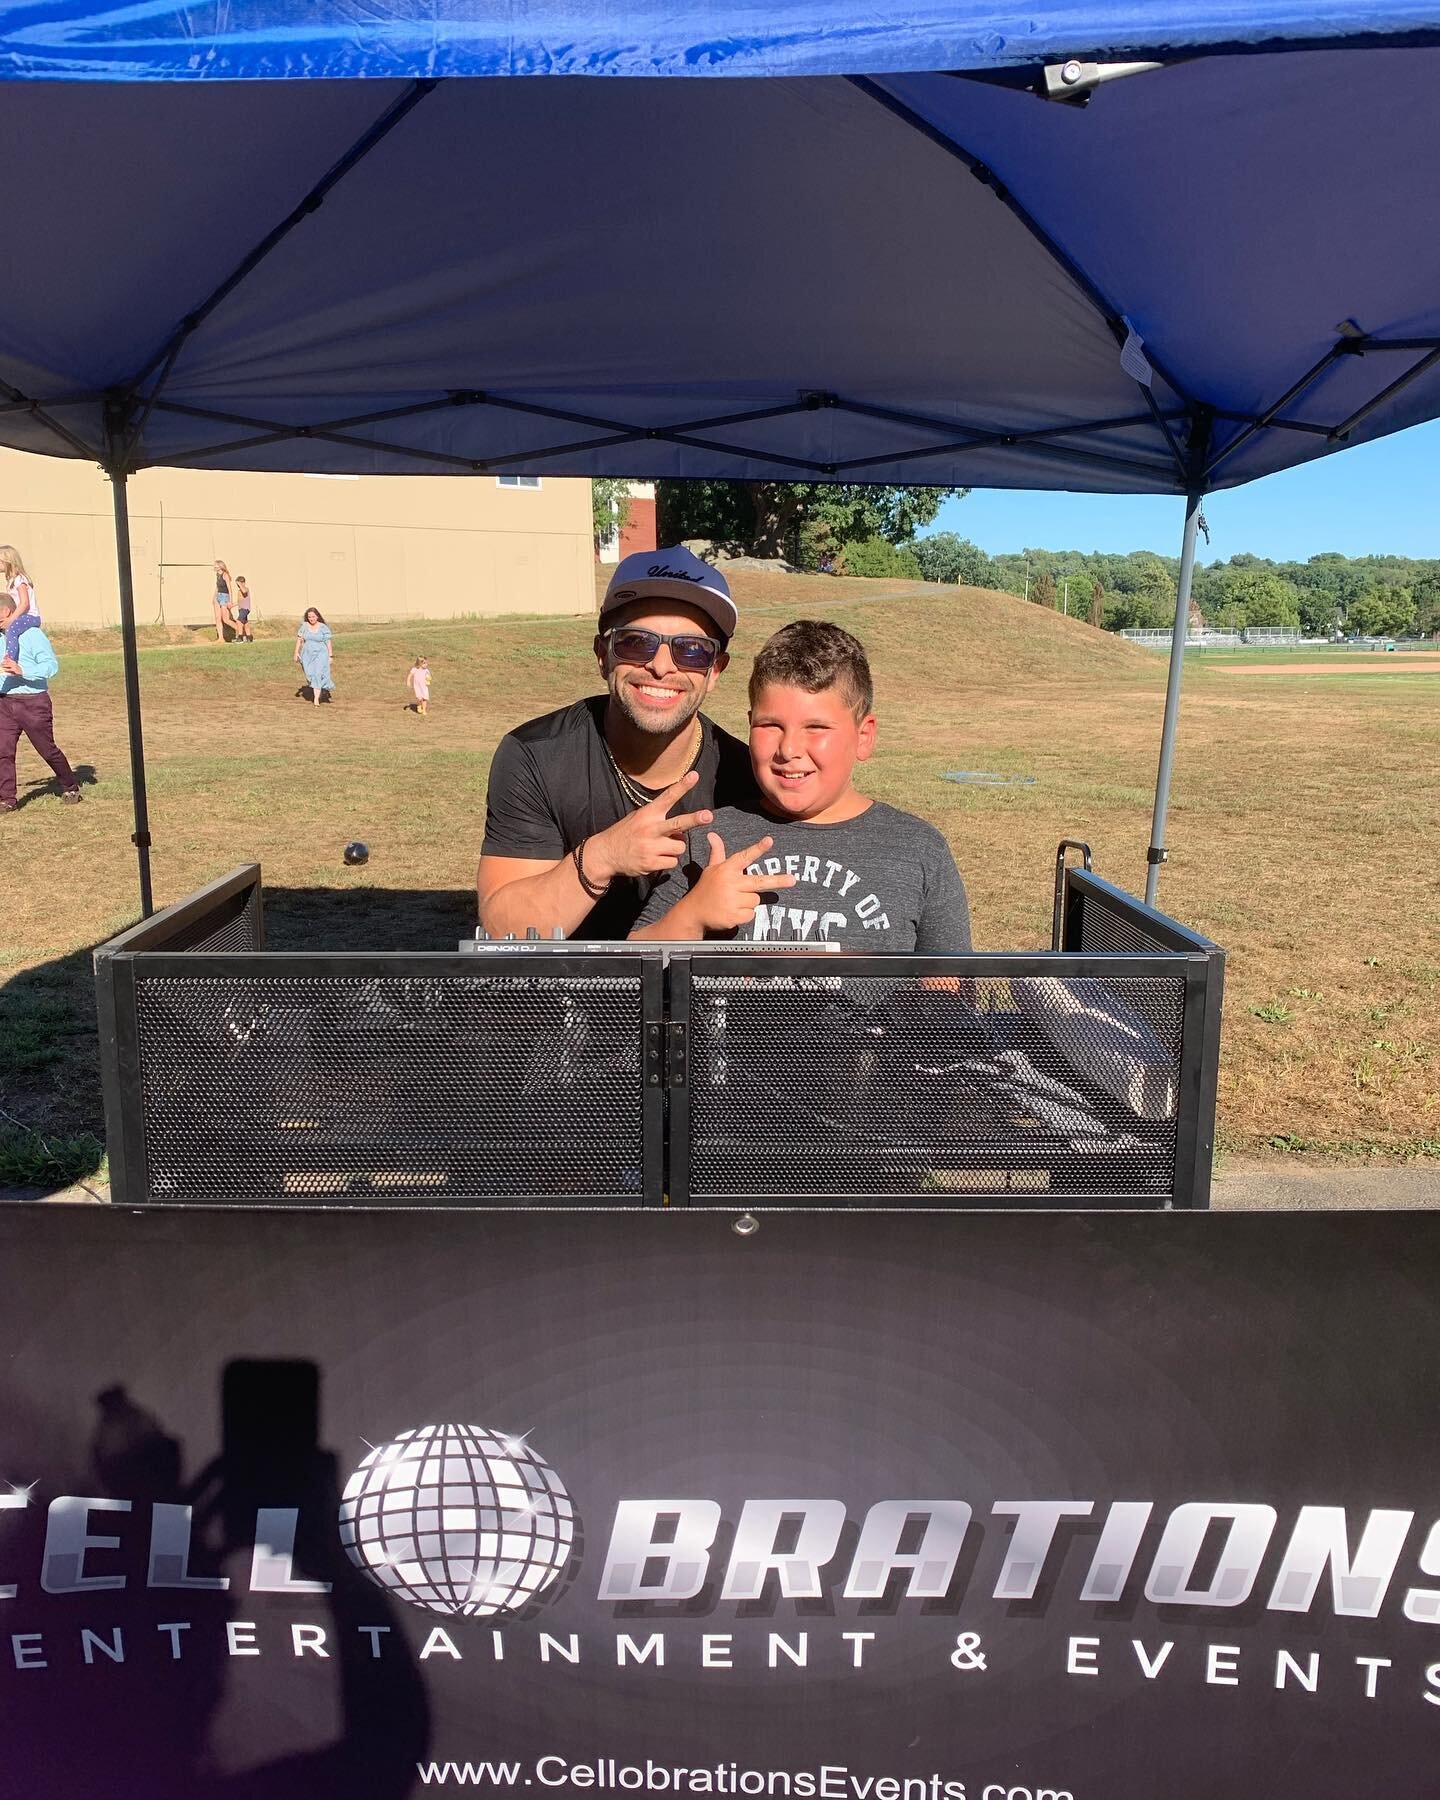 They say start em young! My Dj protege - NOAH. 
I&rsquo;ve mentored a lot of kids but this one keeps me on my toes. Always ambitious and heck of a sense of humor for a kid. Love watching him grow. Keep an eye out for him at #kingshighwayelementarysch